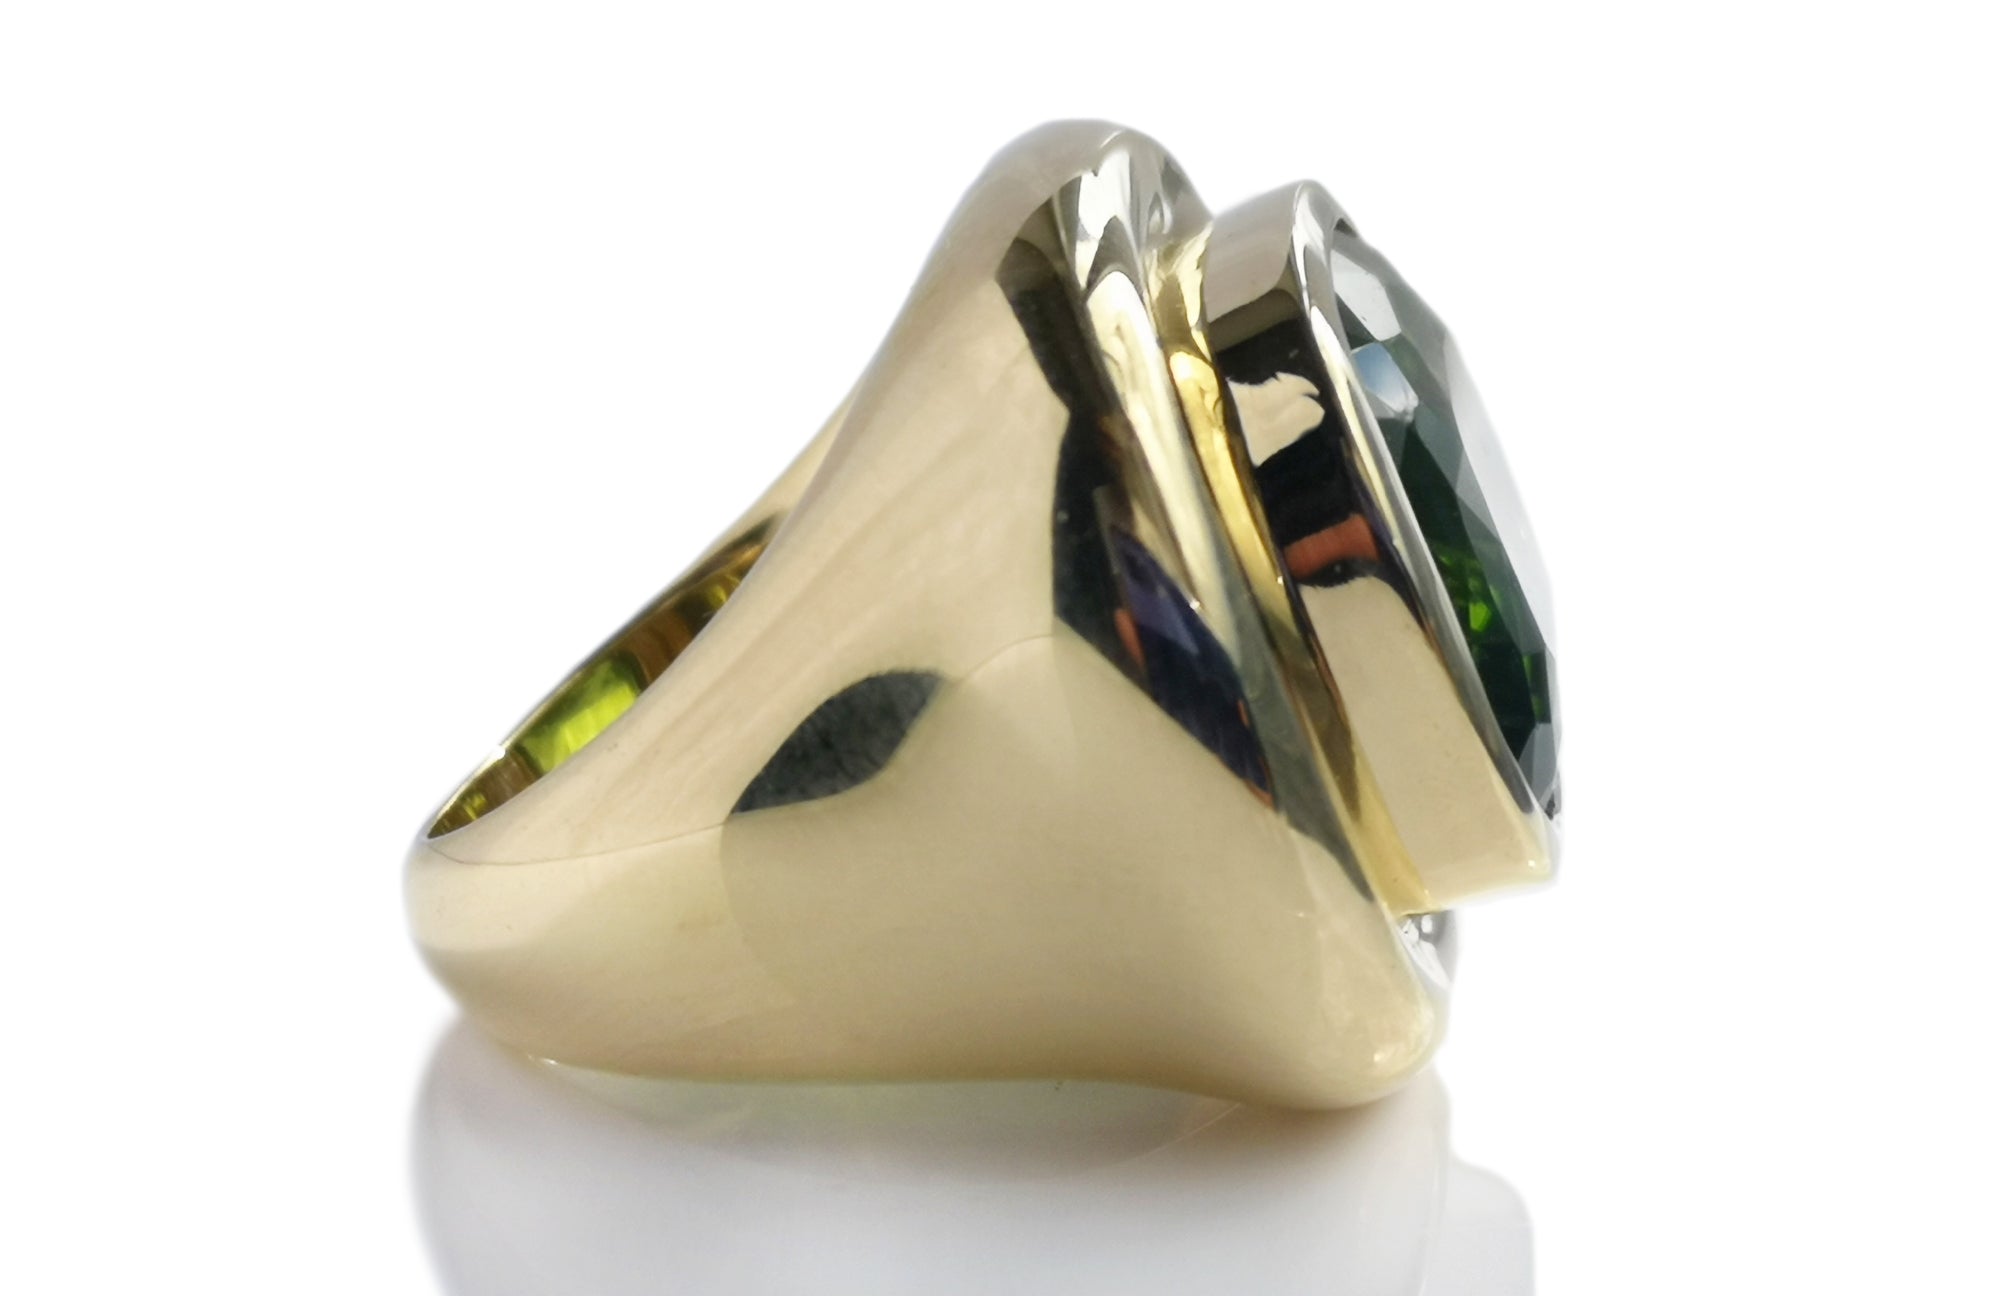 Tiffany & Co. 1980s Vintage 20 Carat Peridot Ring by Paloma Picasso